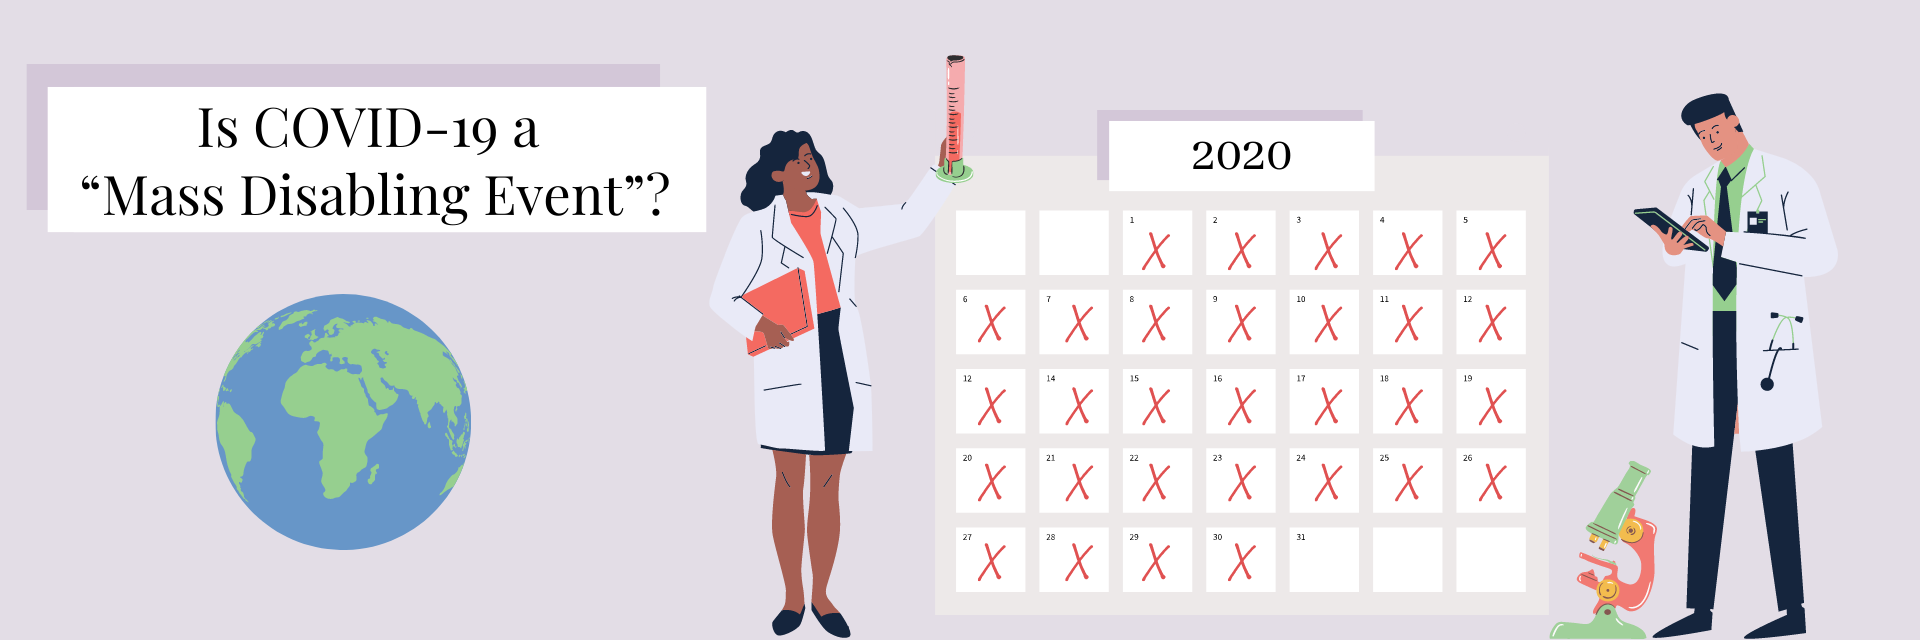 Title: Is COVID a Mass Disabling Event? Graphic: the globe sits below the title, and two doctors stand beside a calendar labeled 2020 with all the days marked with an "X"